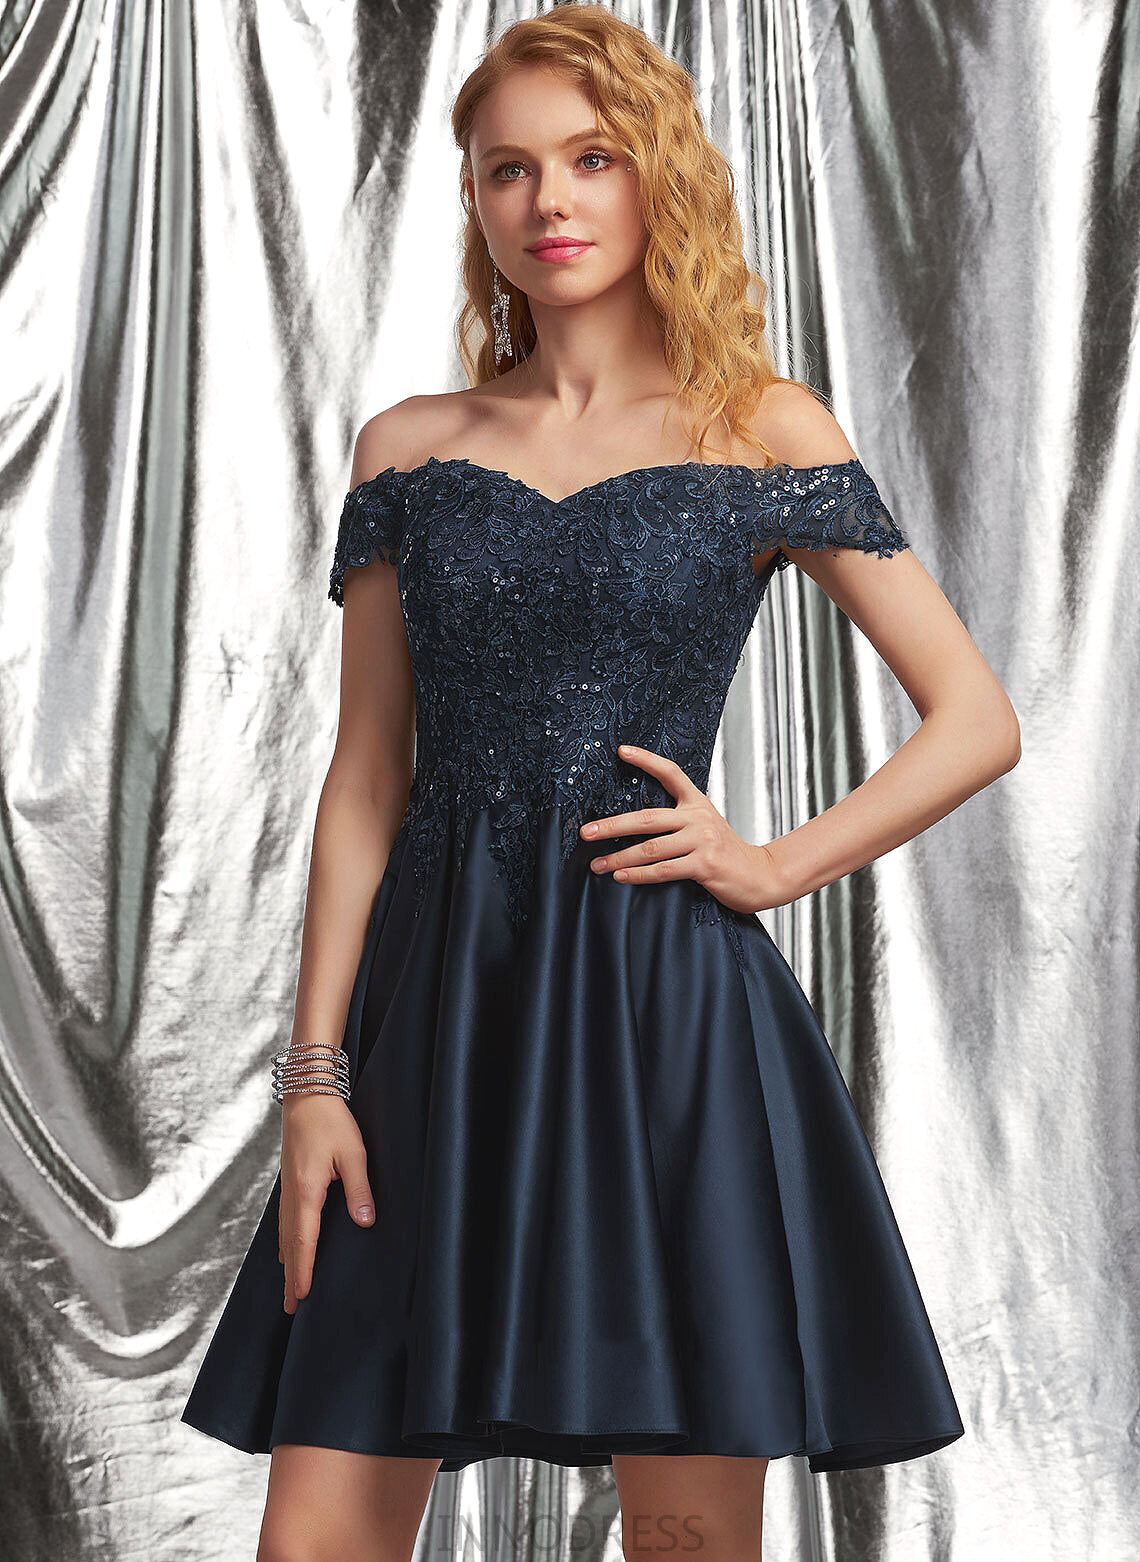 Bridesmaid Kinley Tracy Homecoming Dresses Dresses